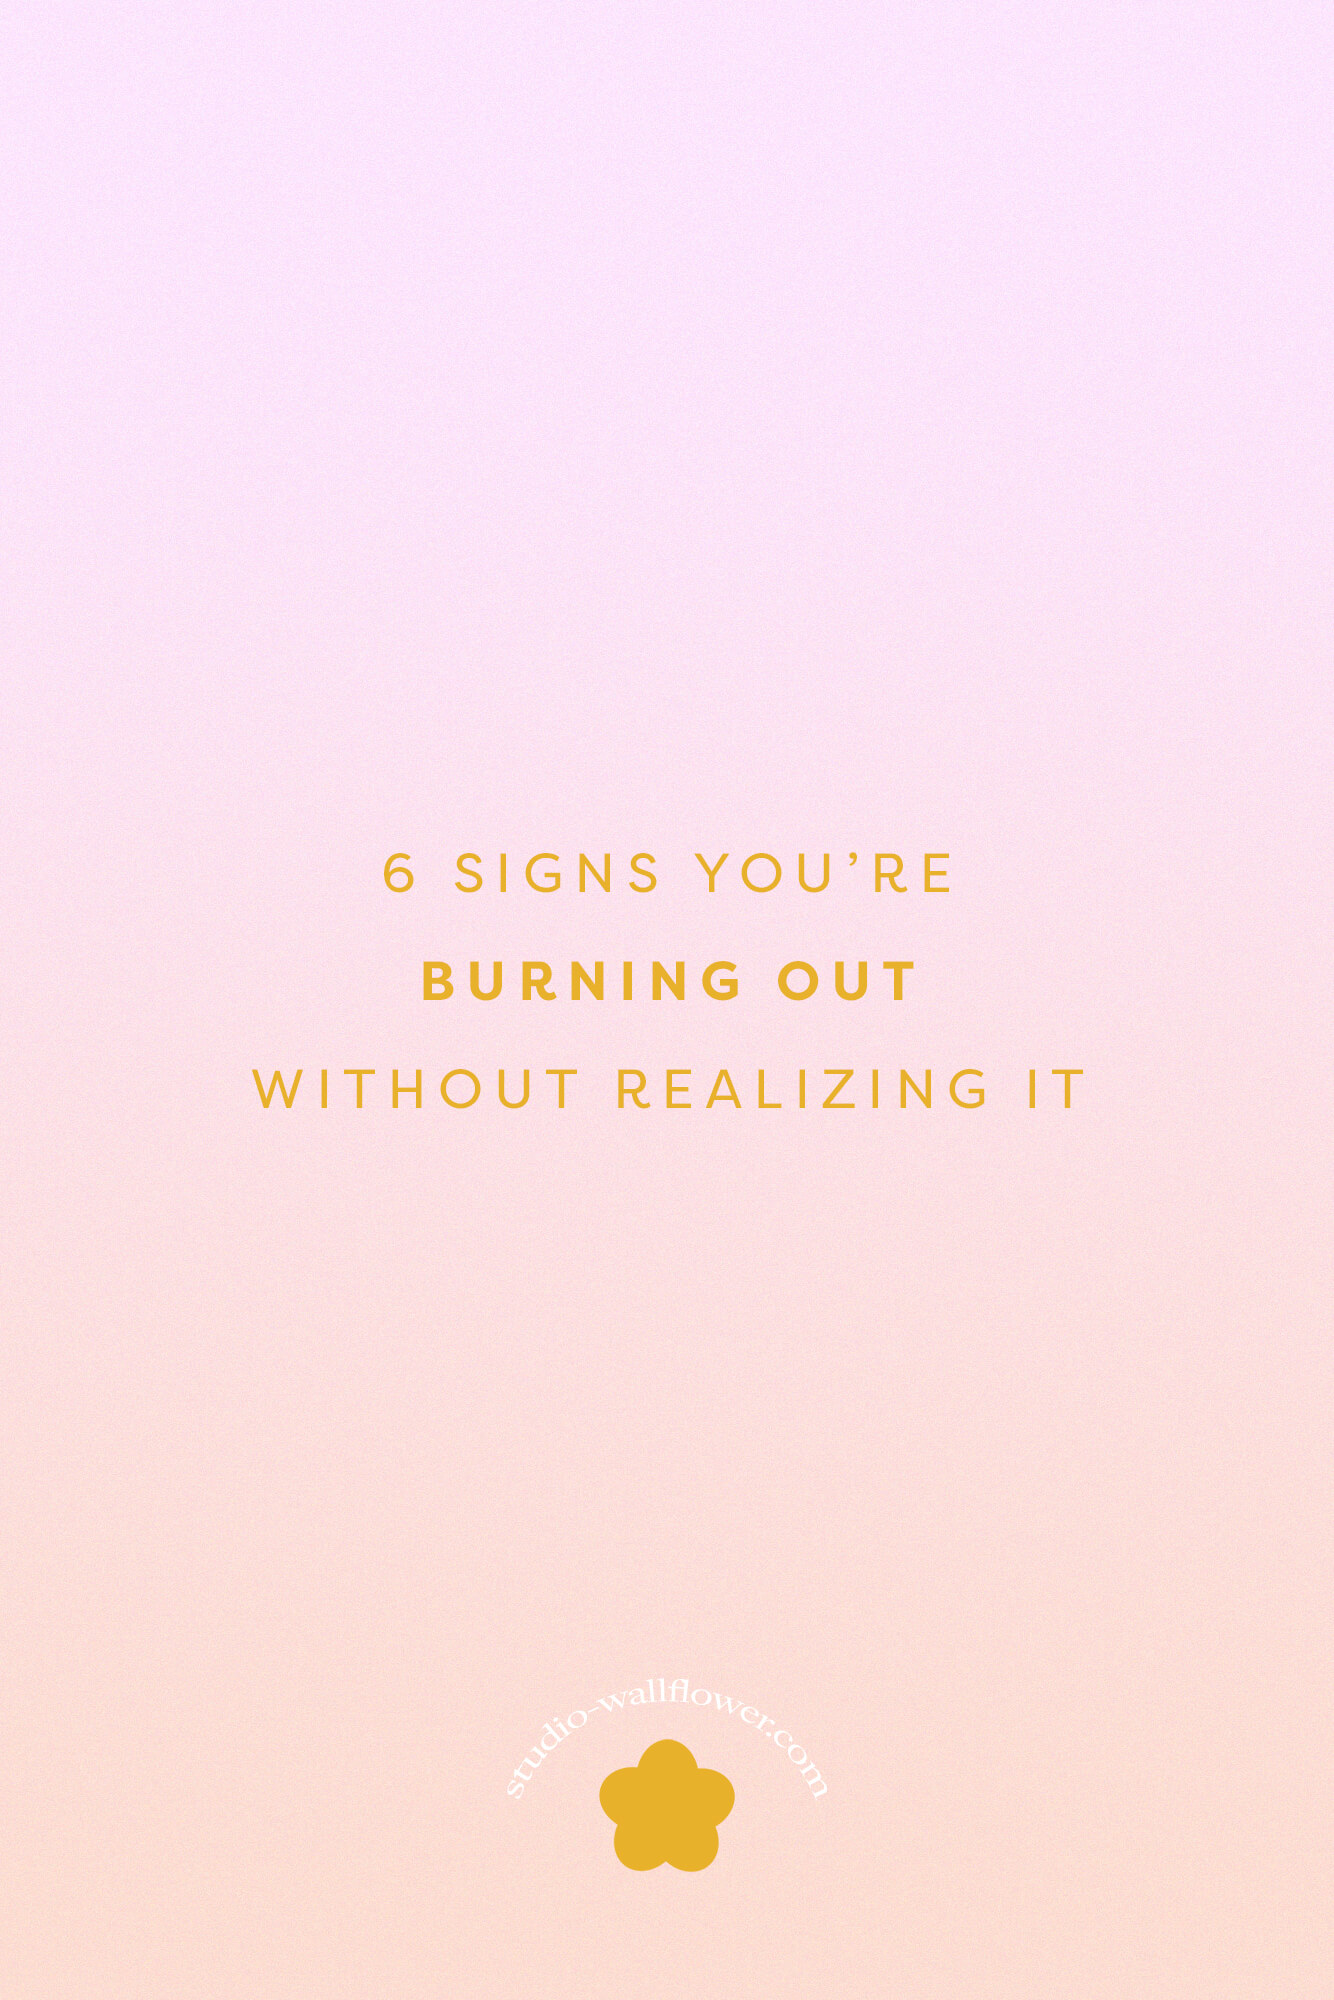 6 Signs You're Burning Out That You Don't Even Realize - via wallflower